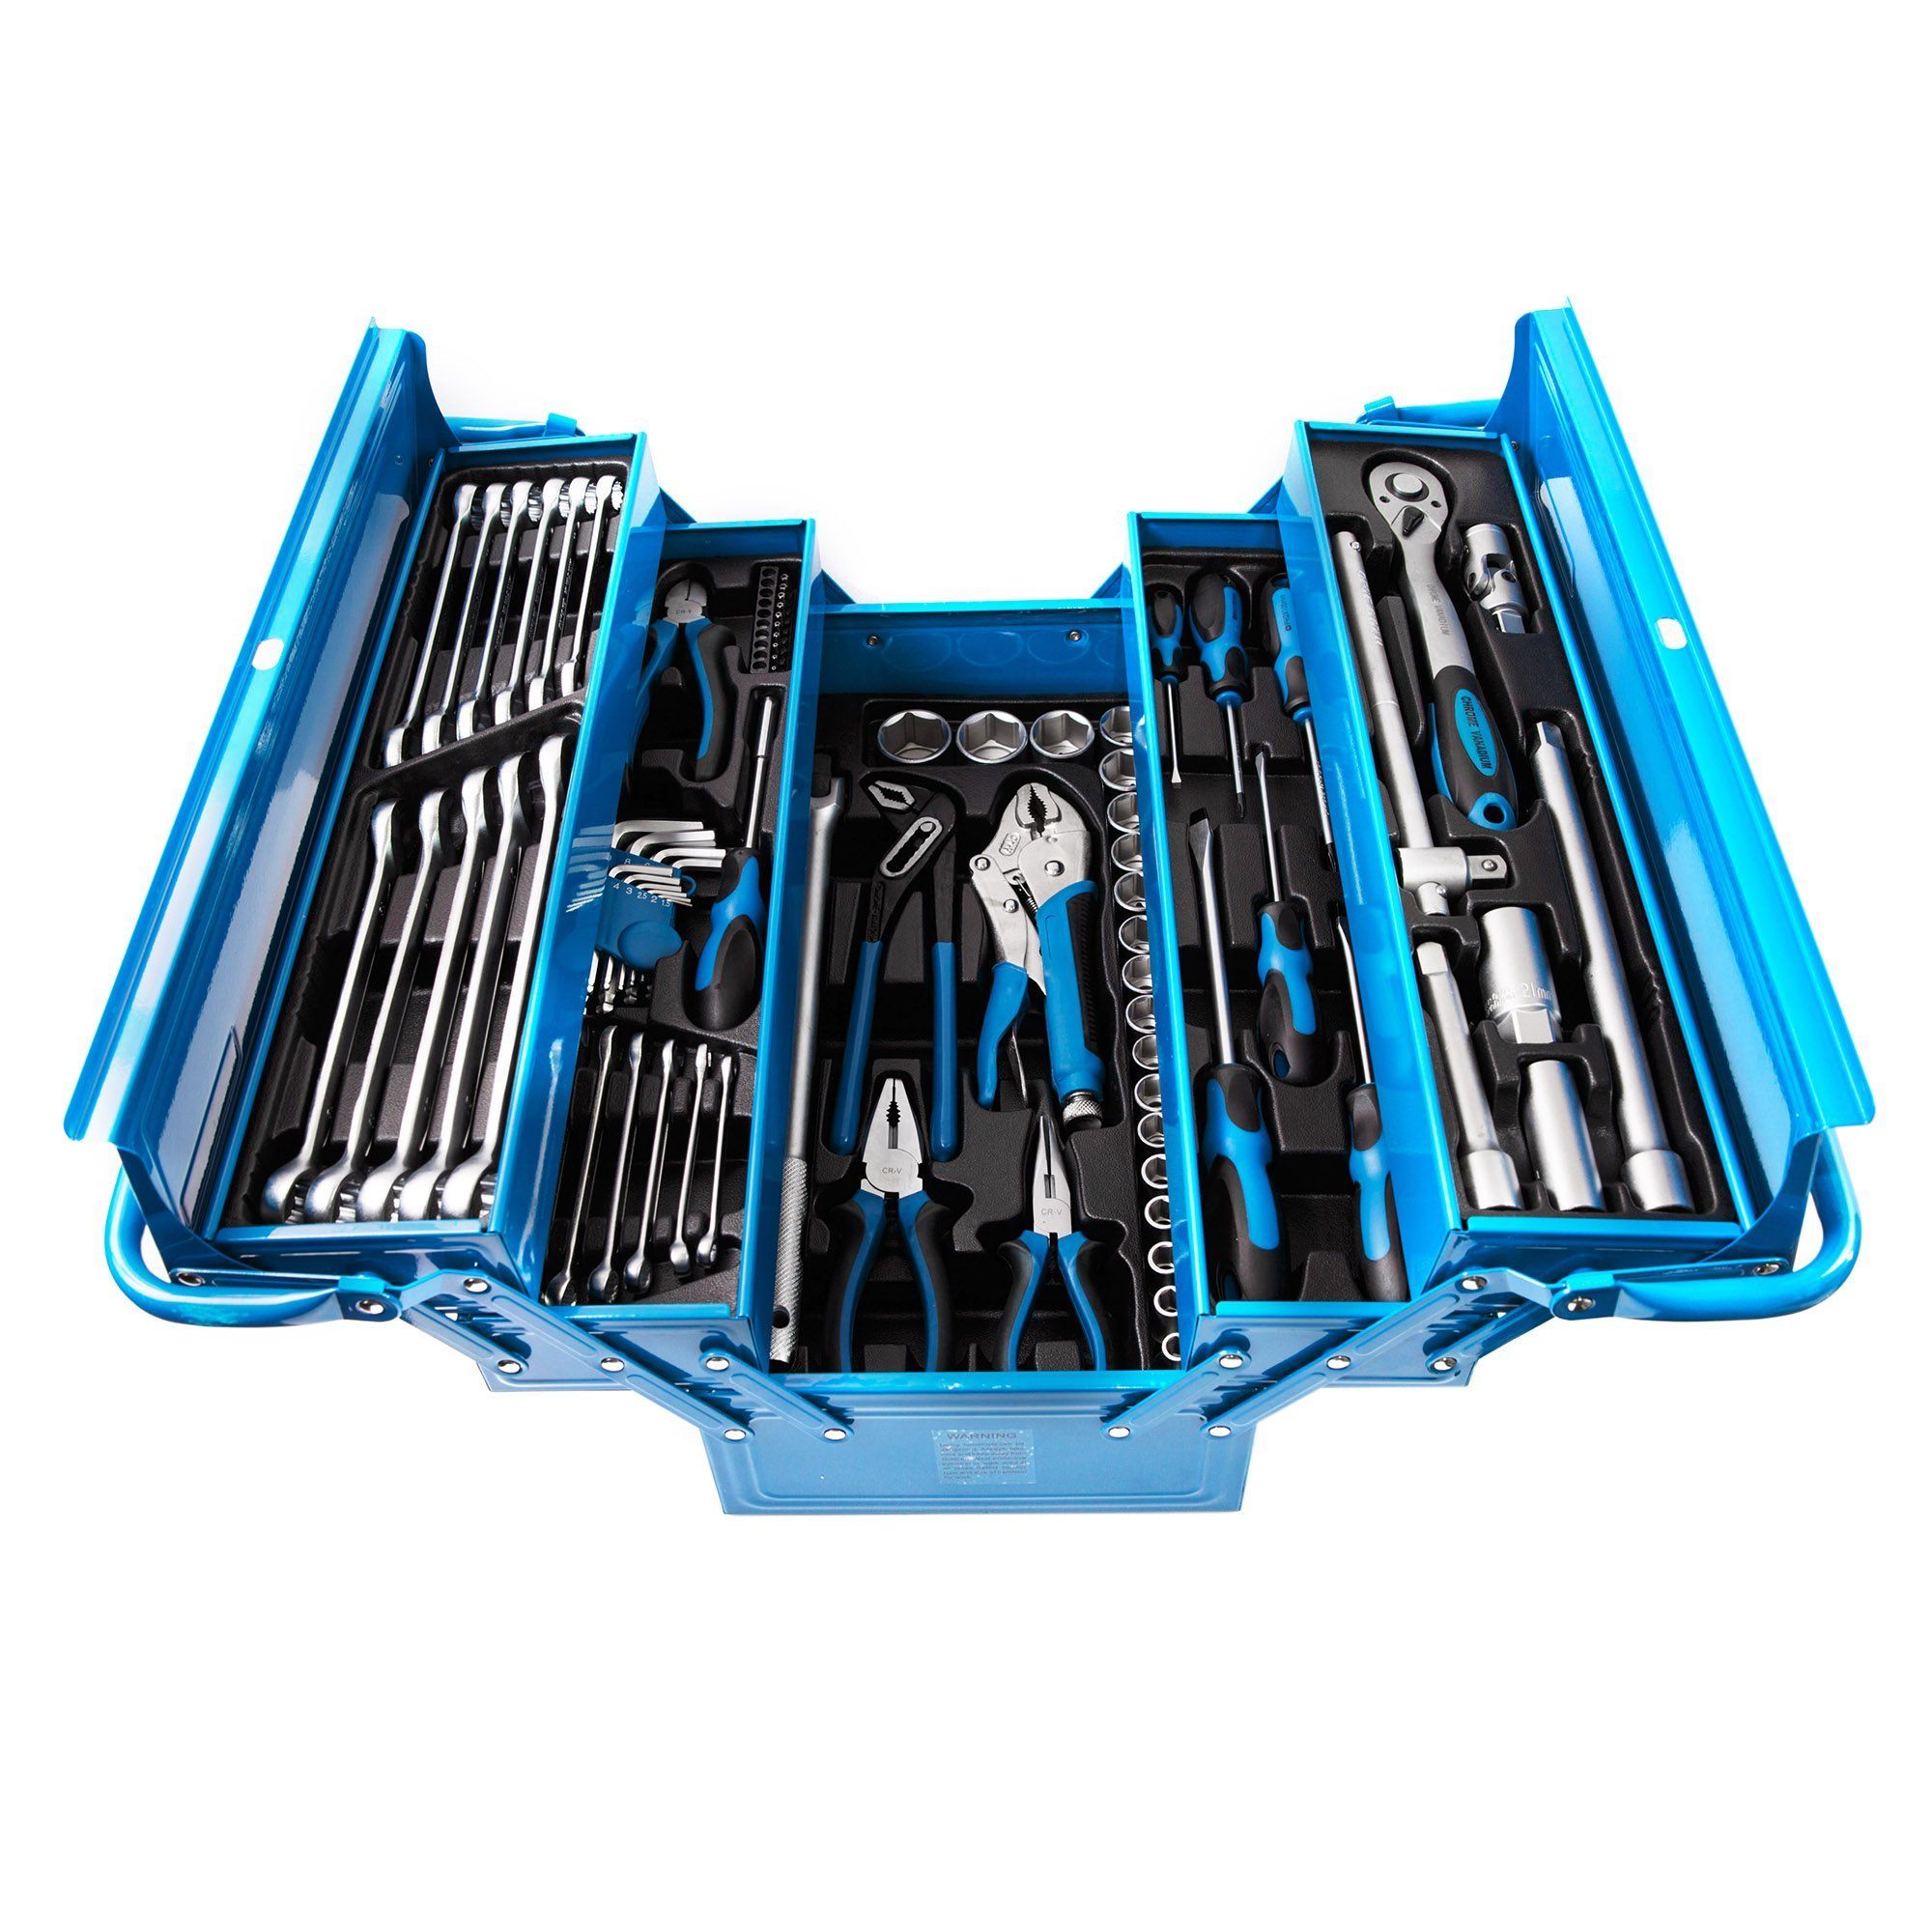 High reputation Complete Tool Set - 86PCS Professional Hand Tool Set with Metal Box  – MACHINERY TOOLS